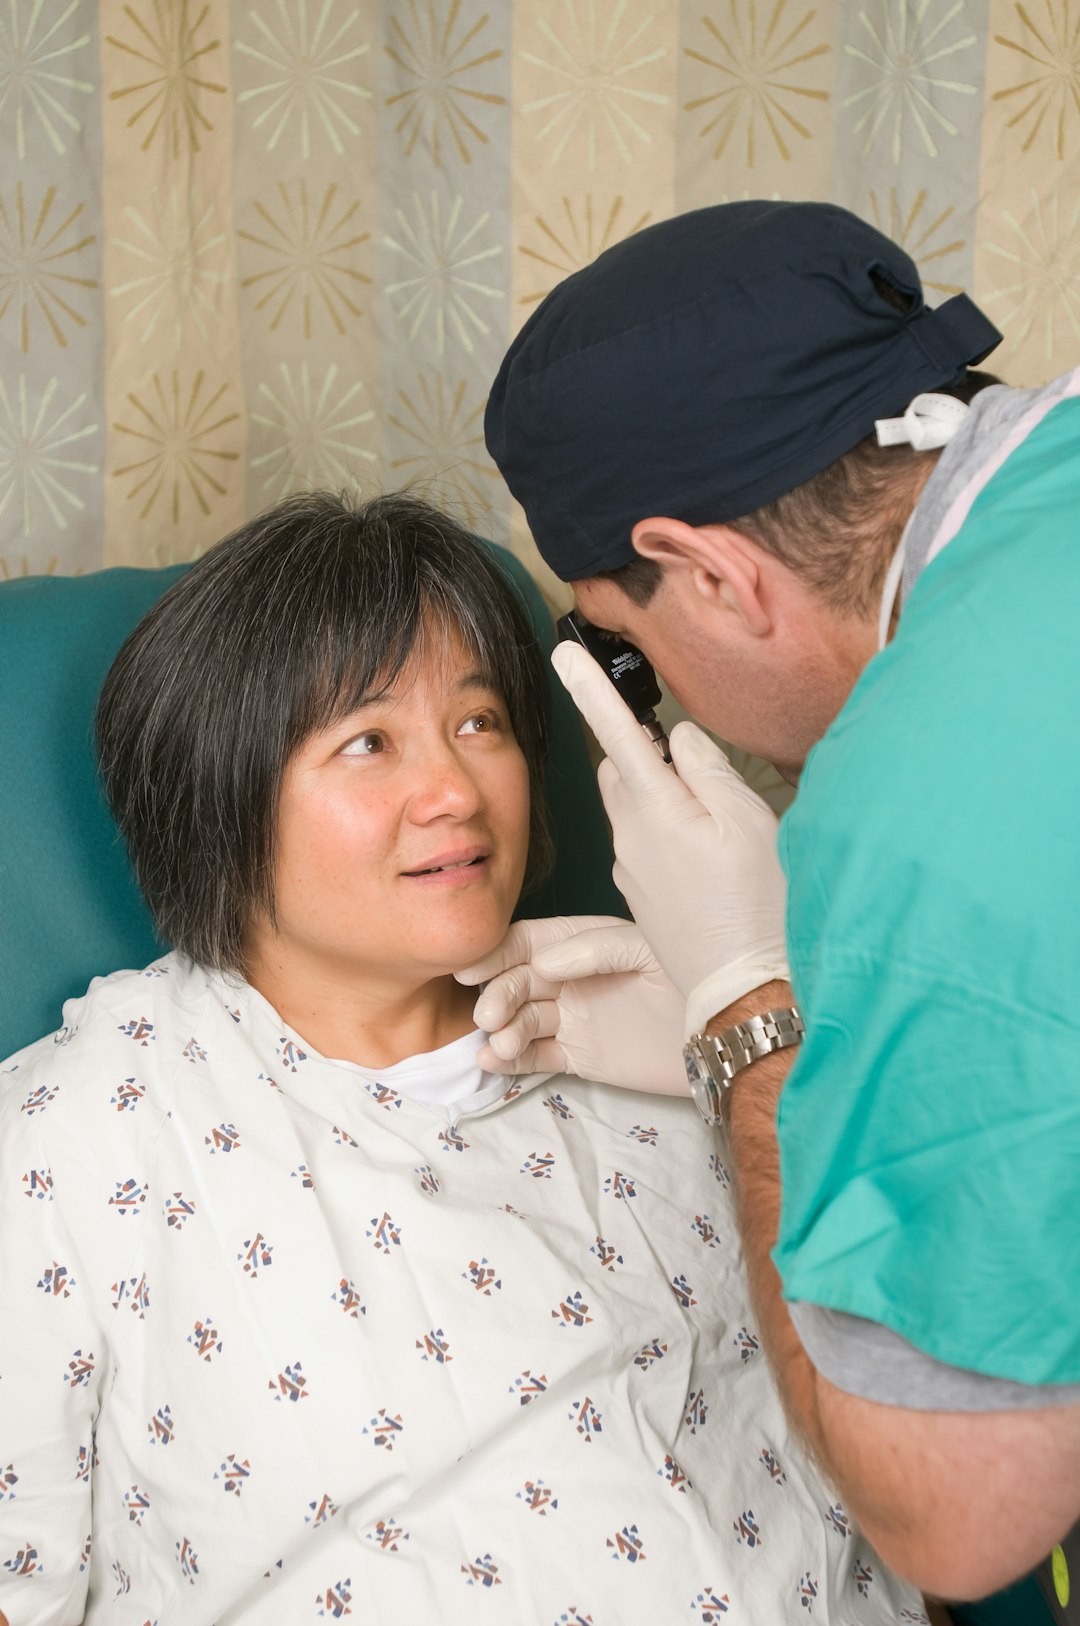 An ophthalmologist examining a patient's eye with an ophthalmoscope